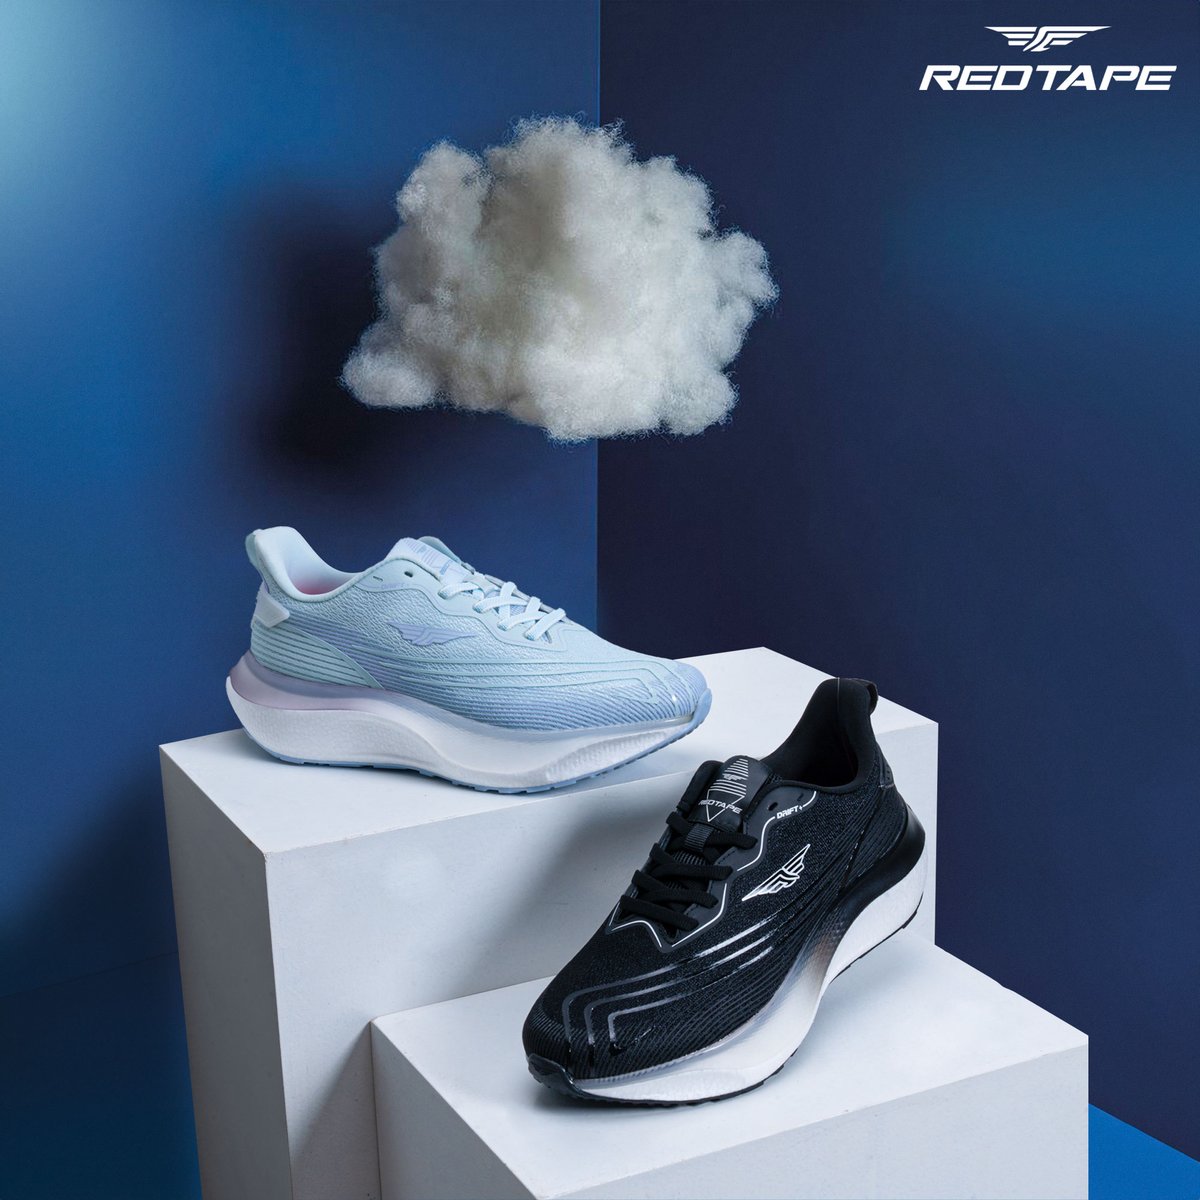 Experience the bliss of cloud-like comfort in our Drift+ shoes – your feet's new best friend! . . . . #cloudcomfort #etpushoes #footbliss #comfortrevolution #walkonclouds #ultimatecomfort #shoegoals #stepintobliss #feetfirst #cloudlikecomfort #etpuexperience #happyfeet